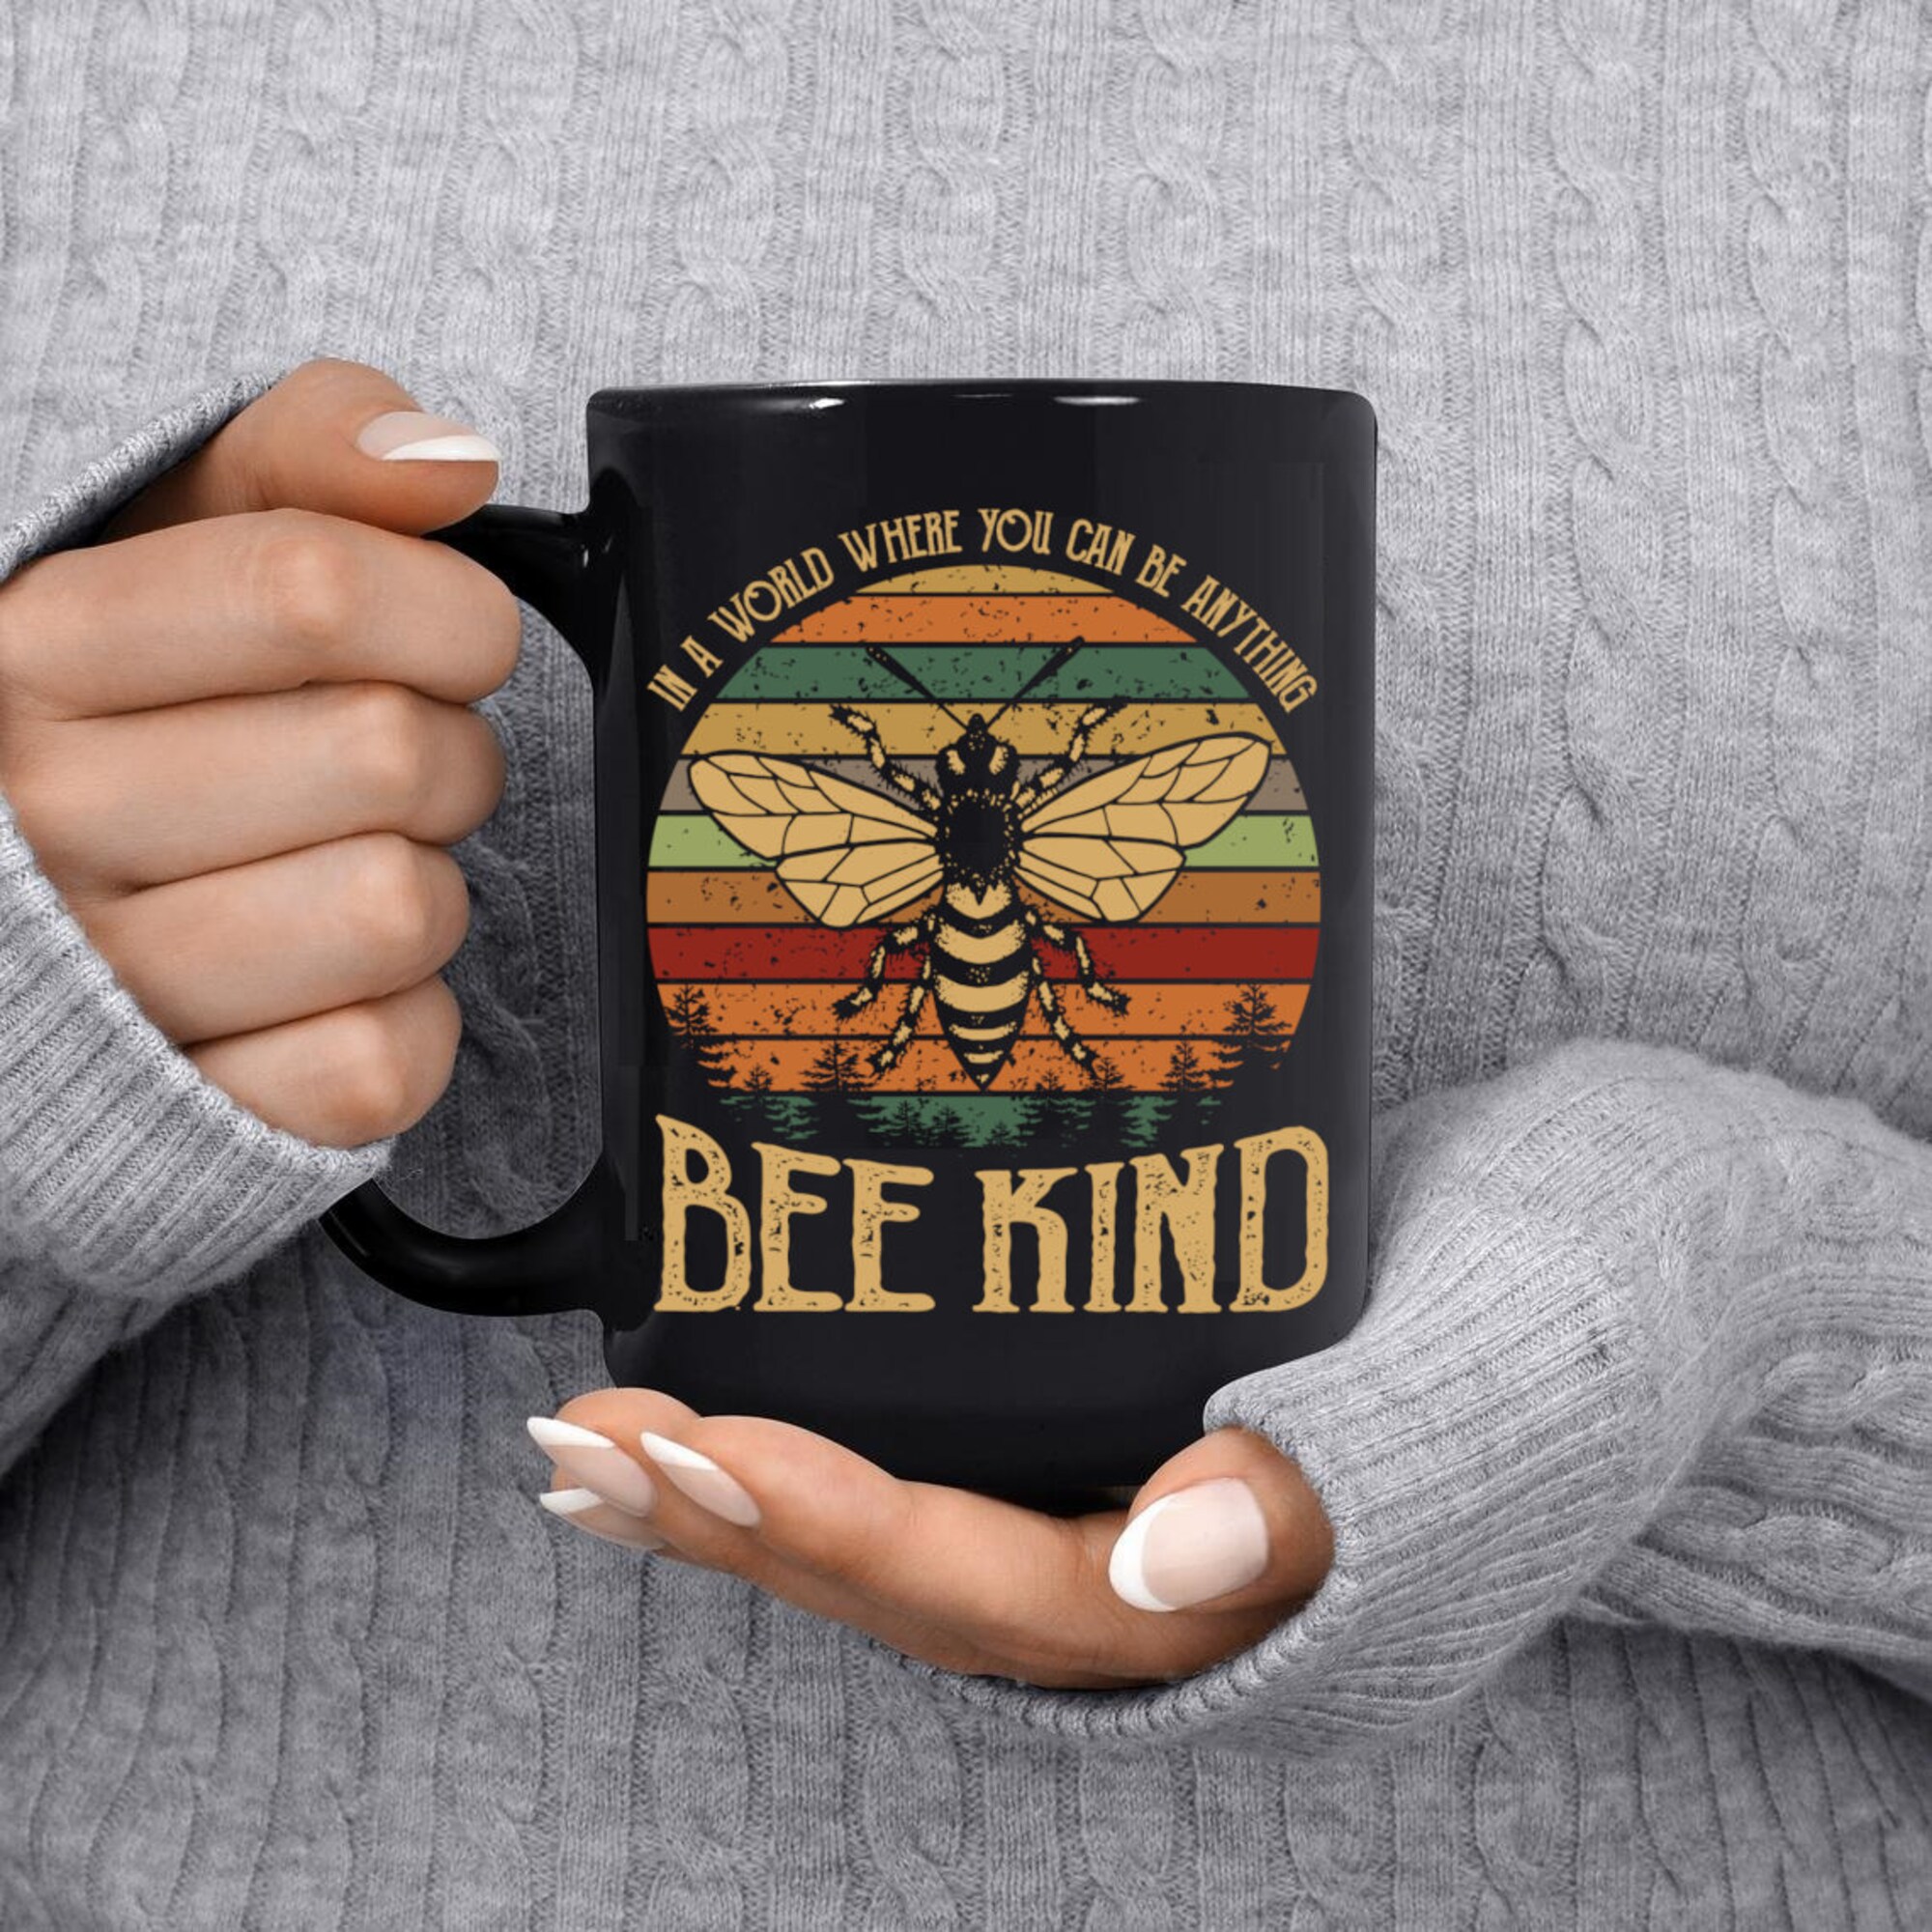 In a World Where You Can Be Anything Bee Kind Mug